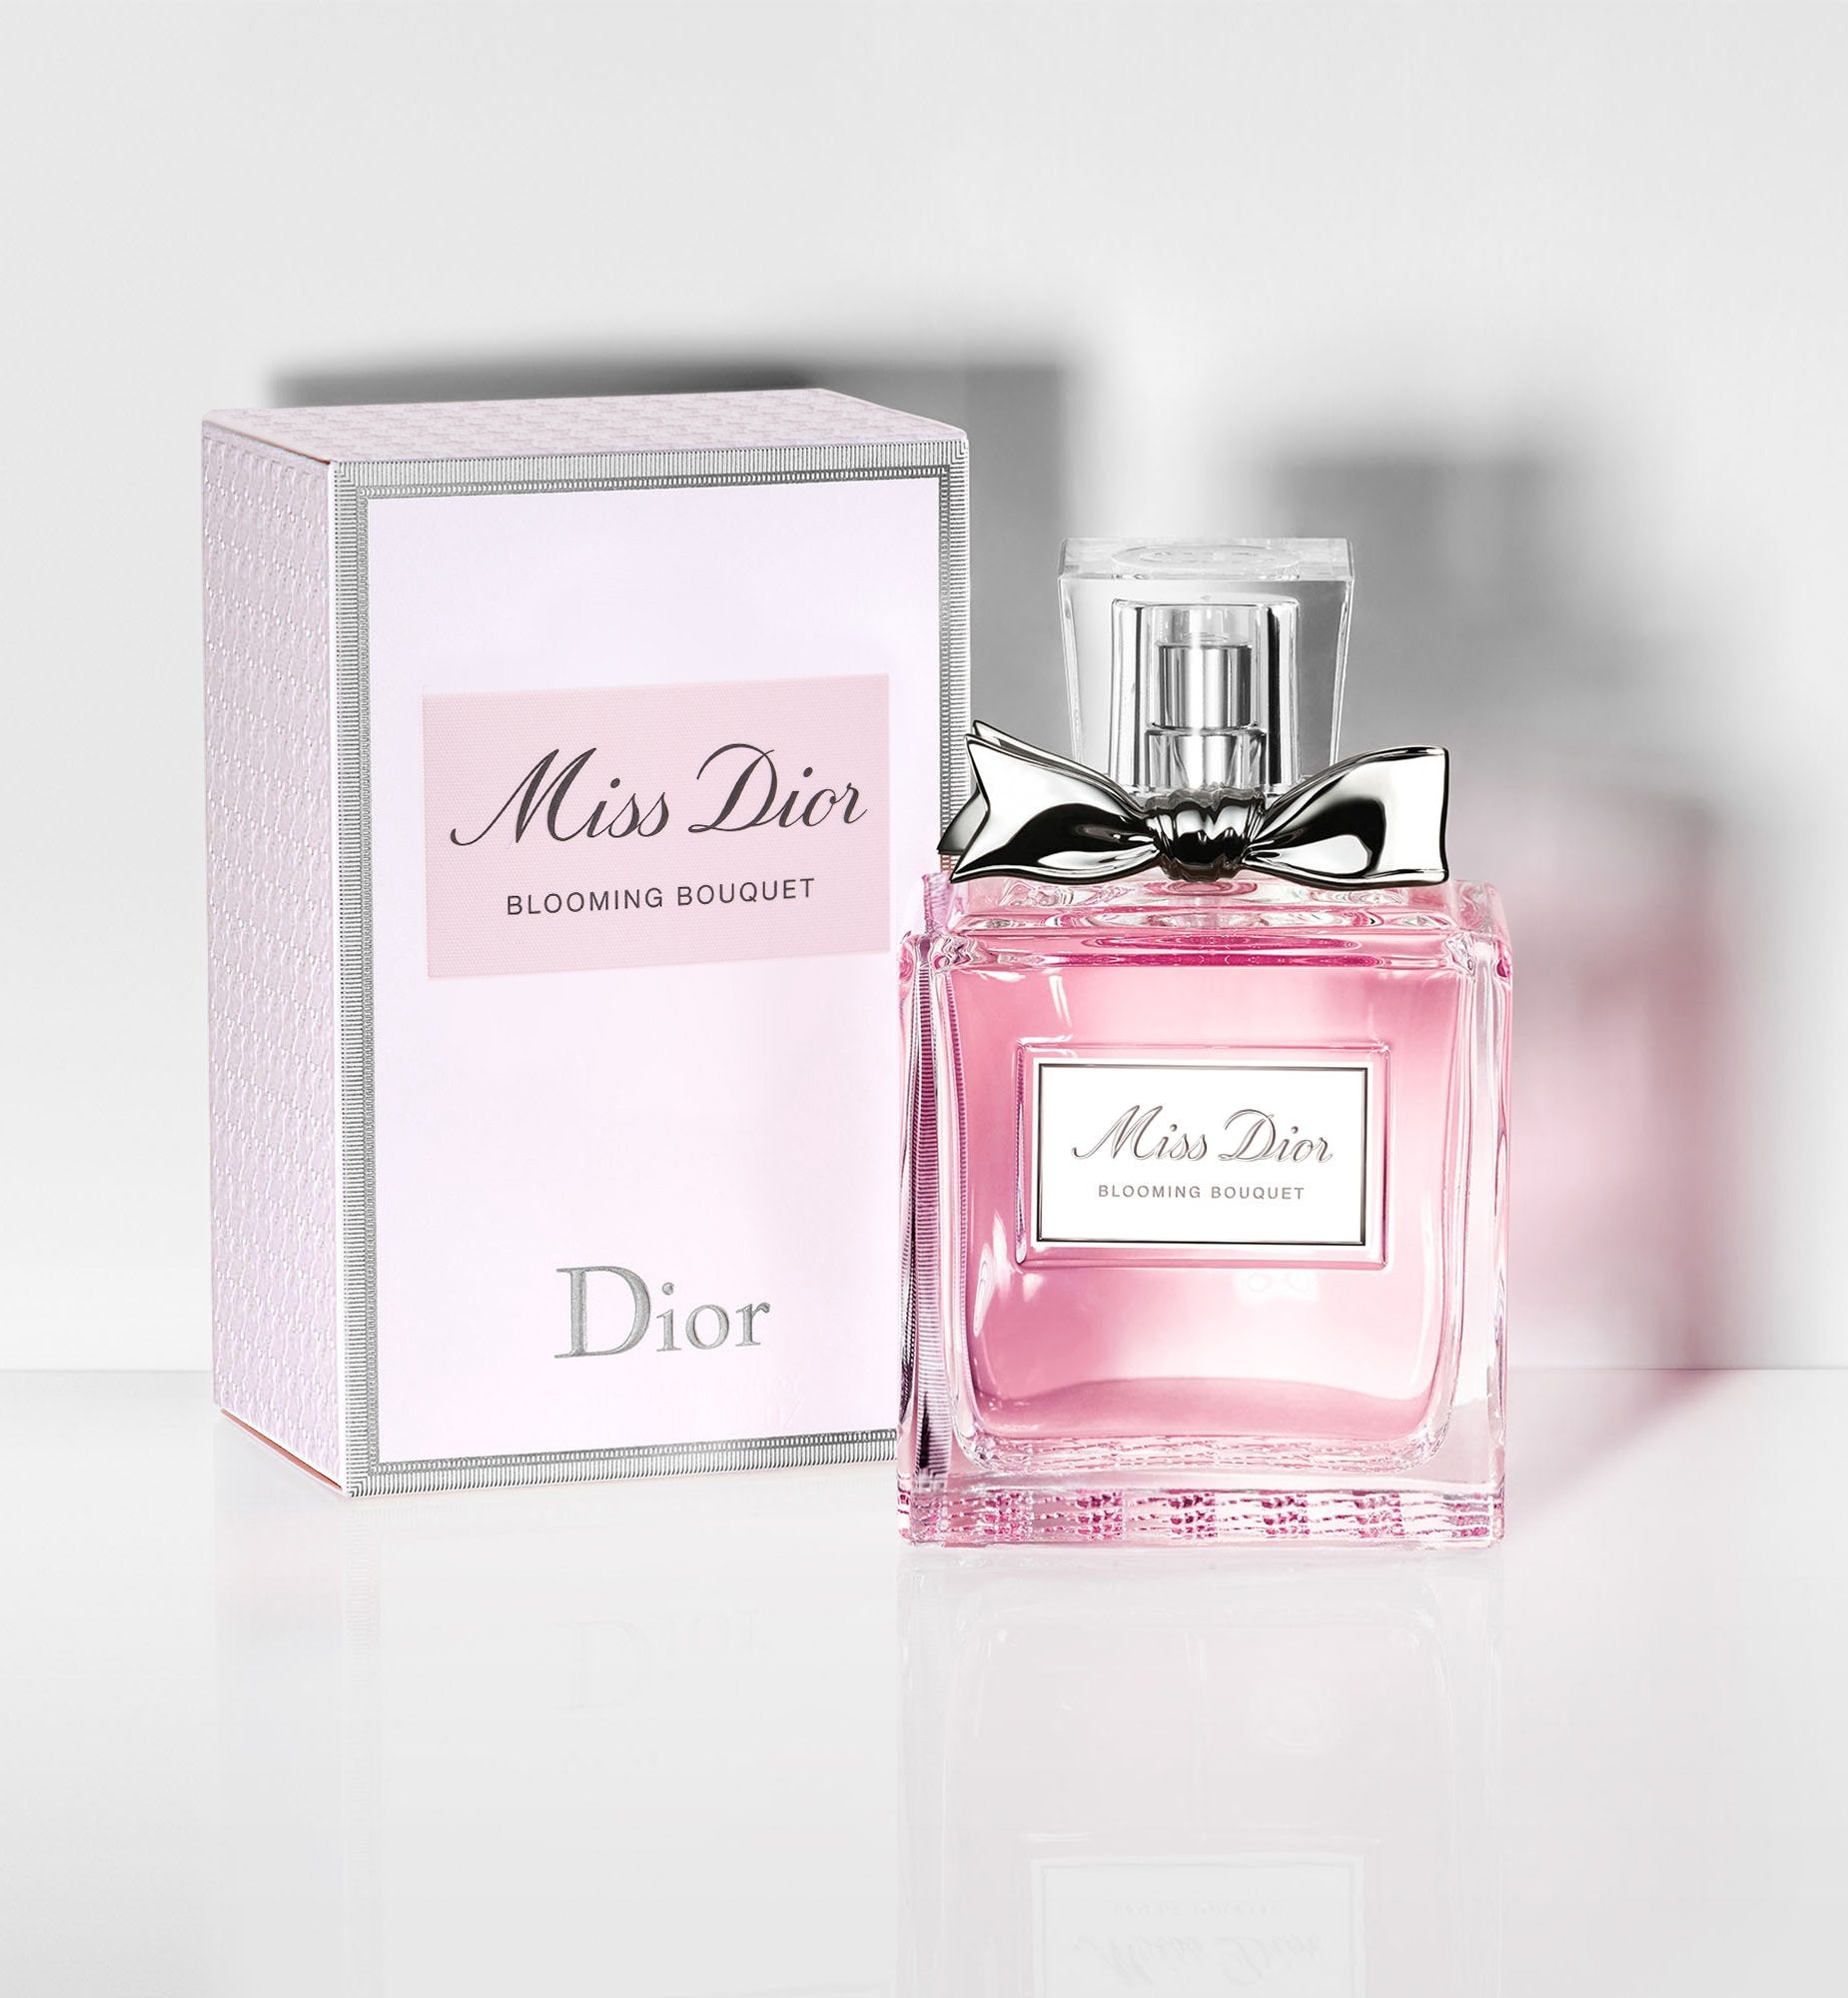 dior perfume blooming bouquet price